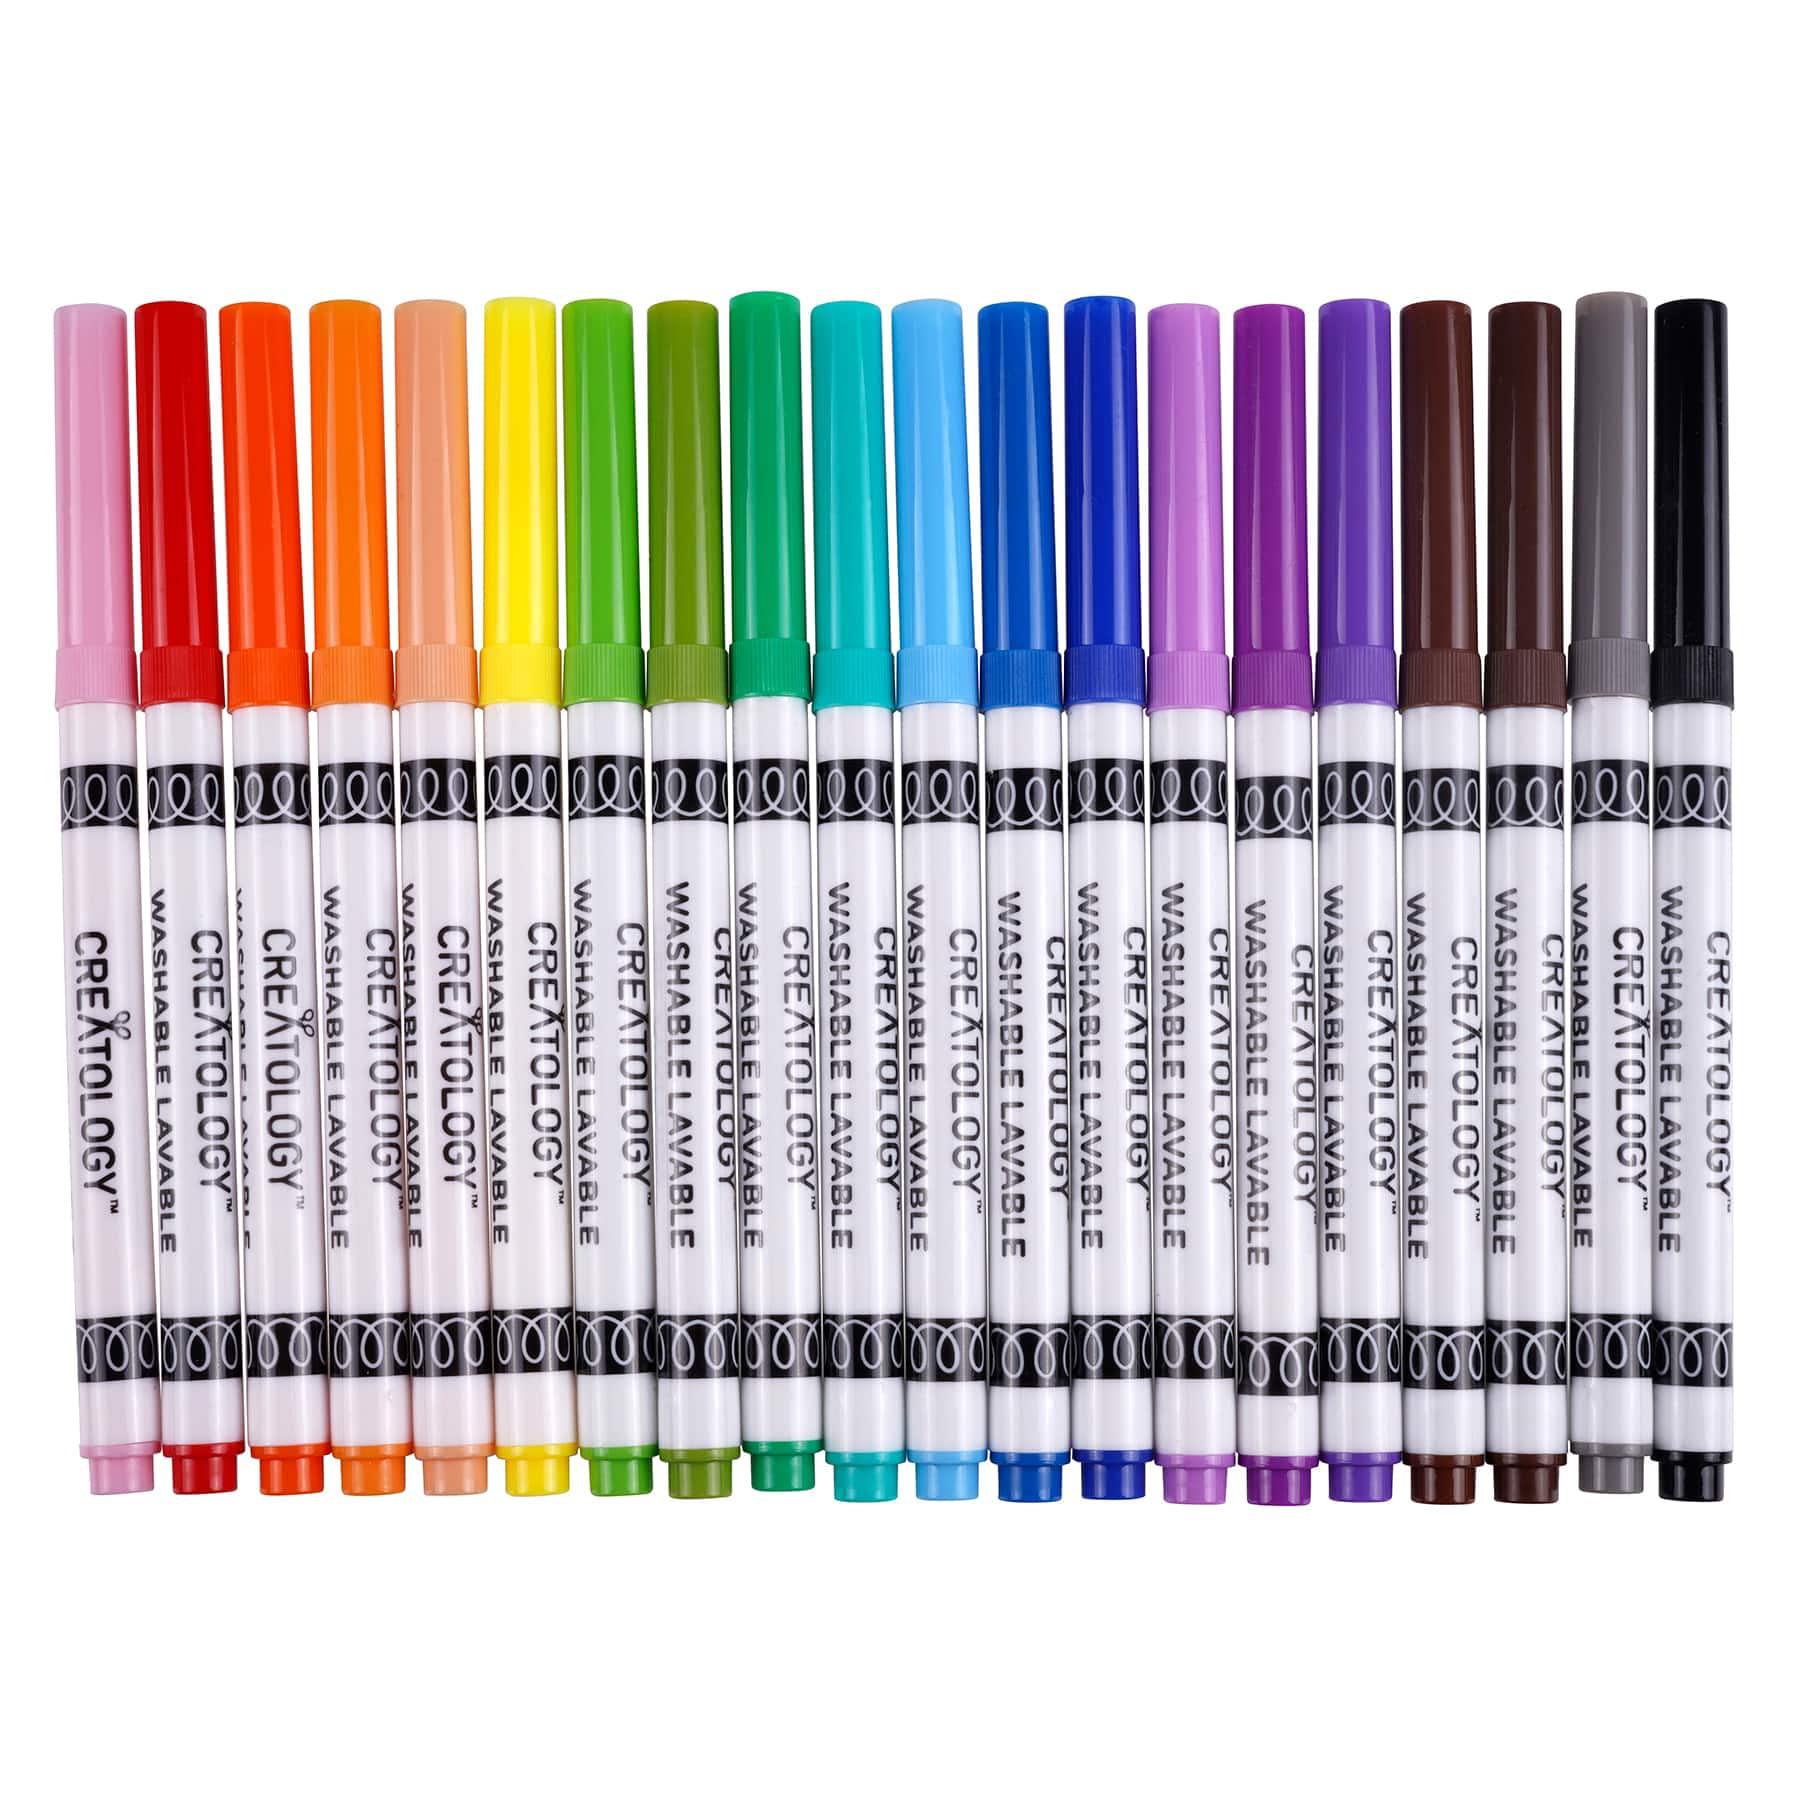 Michaels Bulk 12 Packs: 20 Ct. (240 total) Round Tip Washable Marker Set by Creatology, Size: 6.3 x 0.47 x 9.64, Assorted